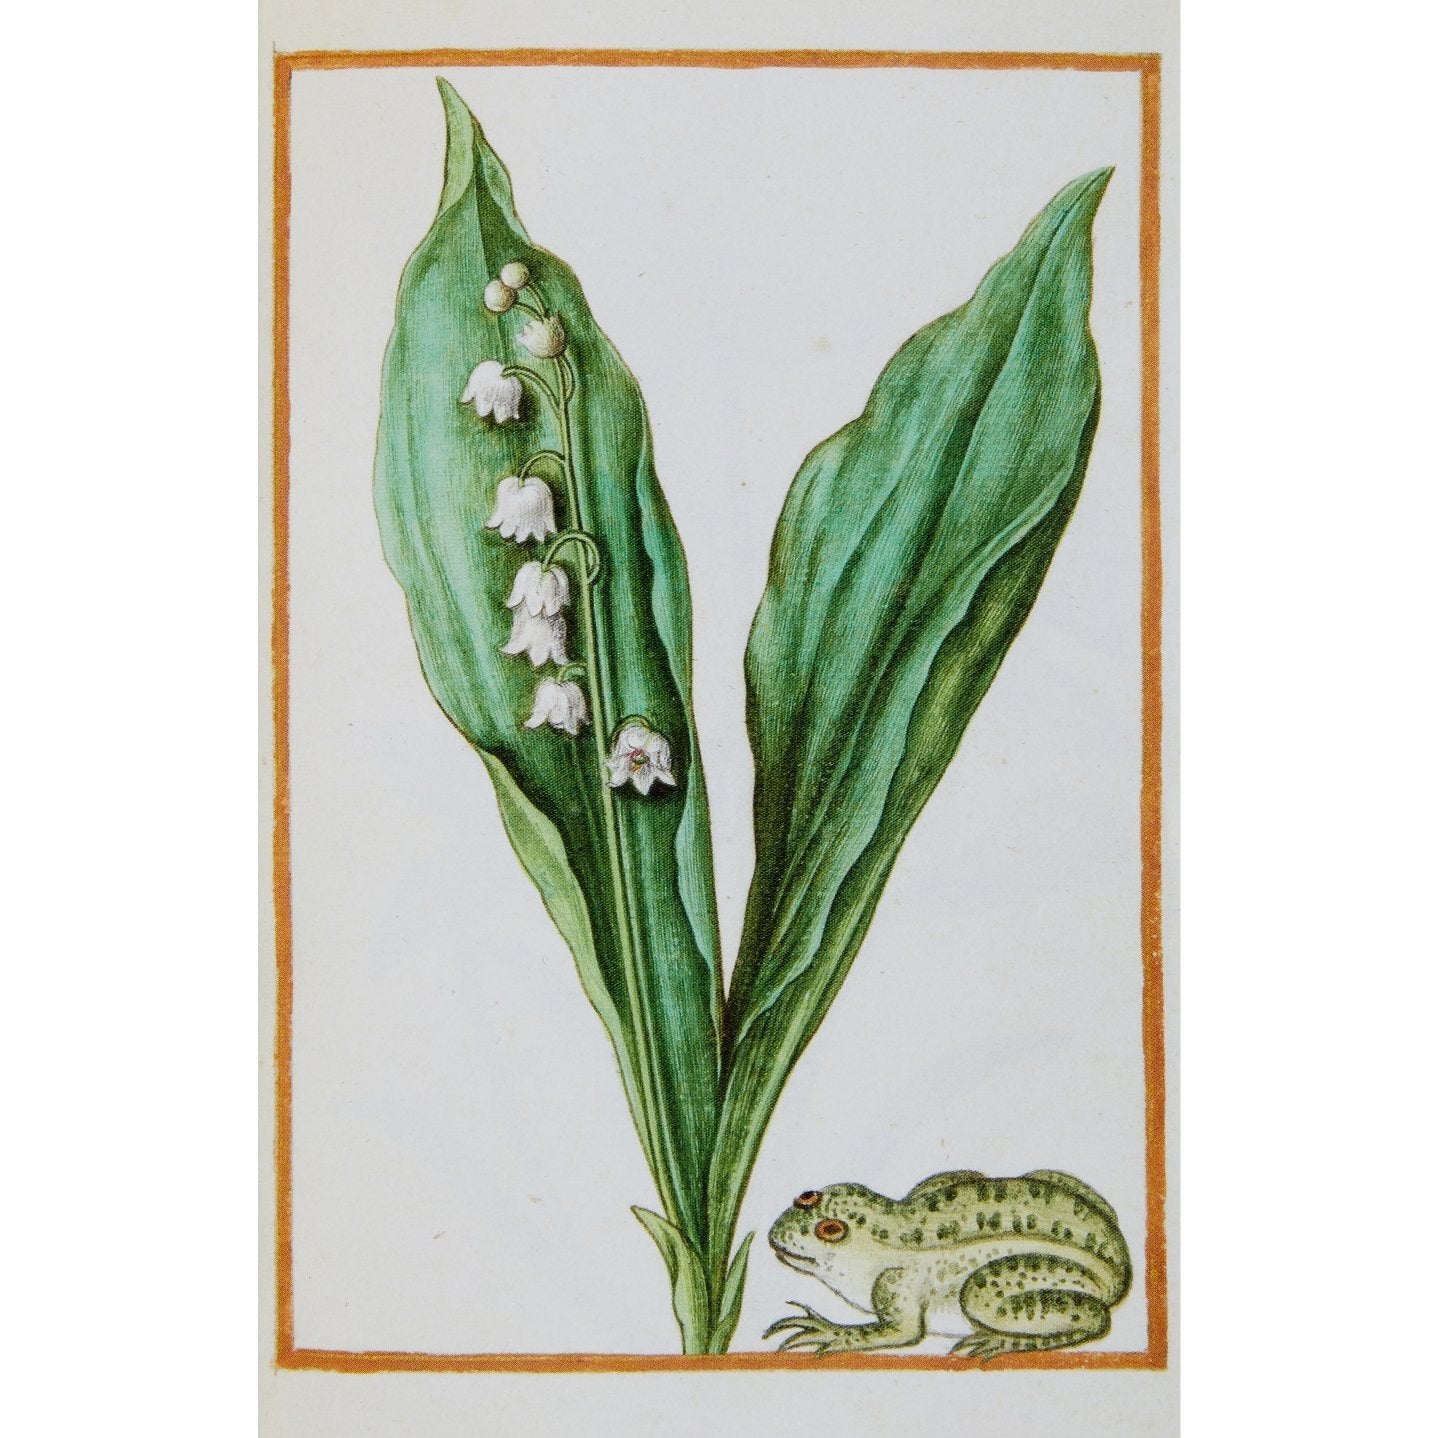 Notecard image - Convallaria majalis with a frog by Antoine de Pinet. From the Broughton collection of the Fitzwilliam Museum, brought to you by CuratingCambridge.co.uk